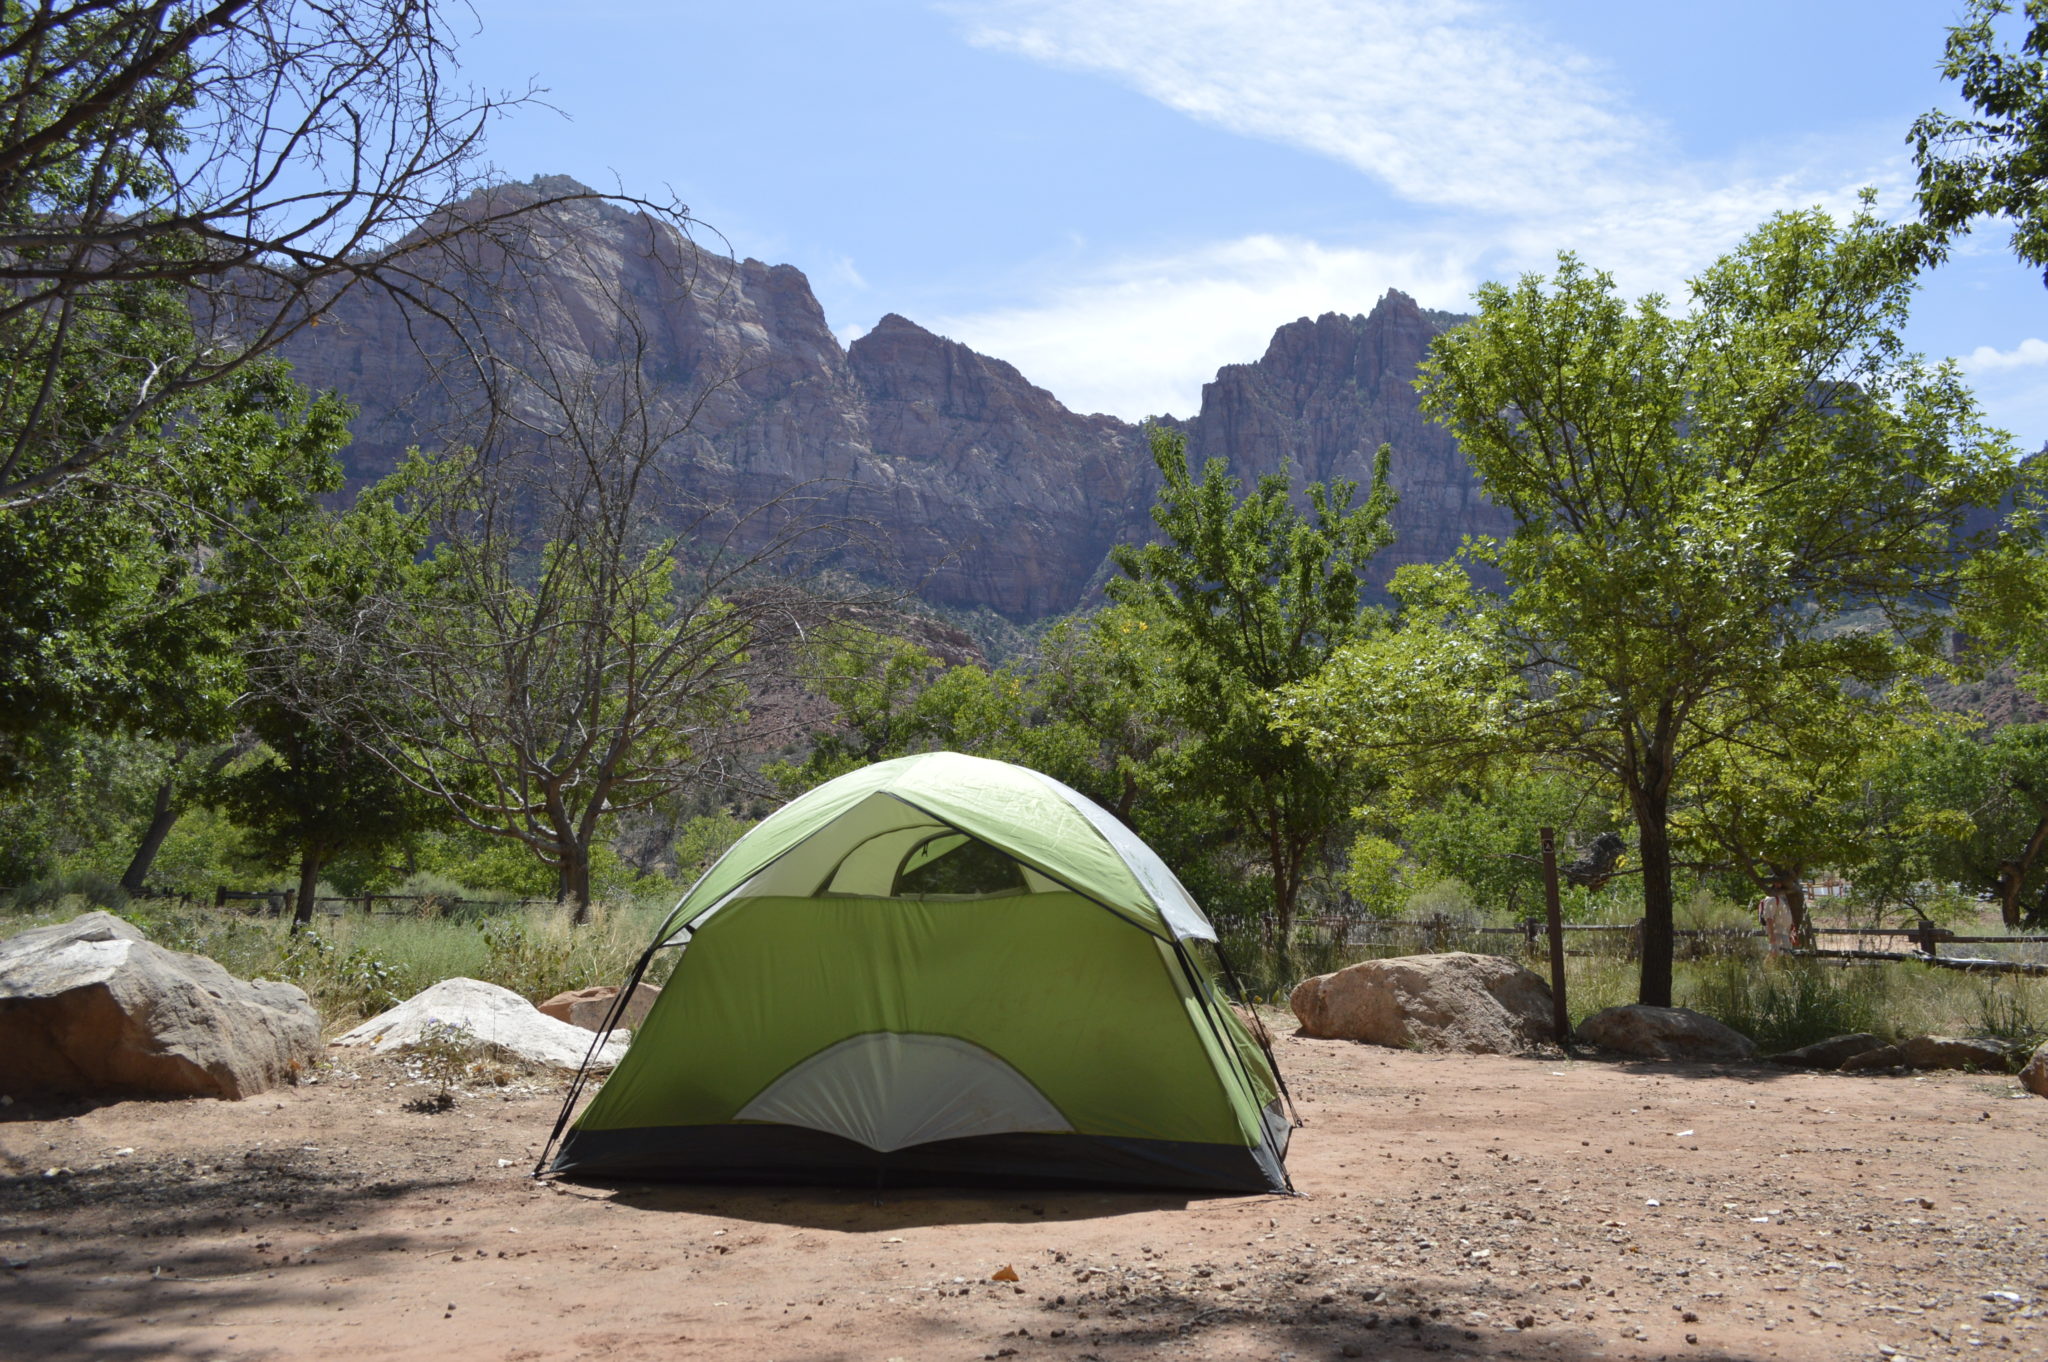 Tent pitched in campground zion national park usa | Round the World